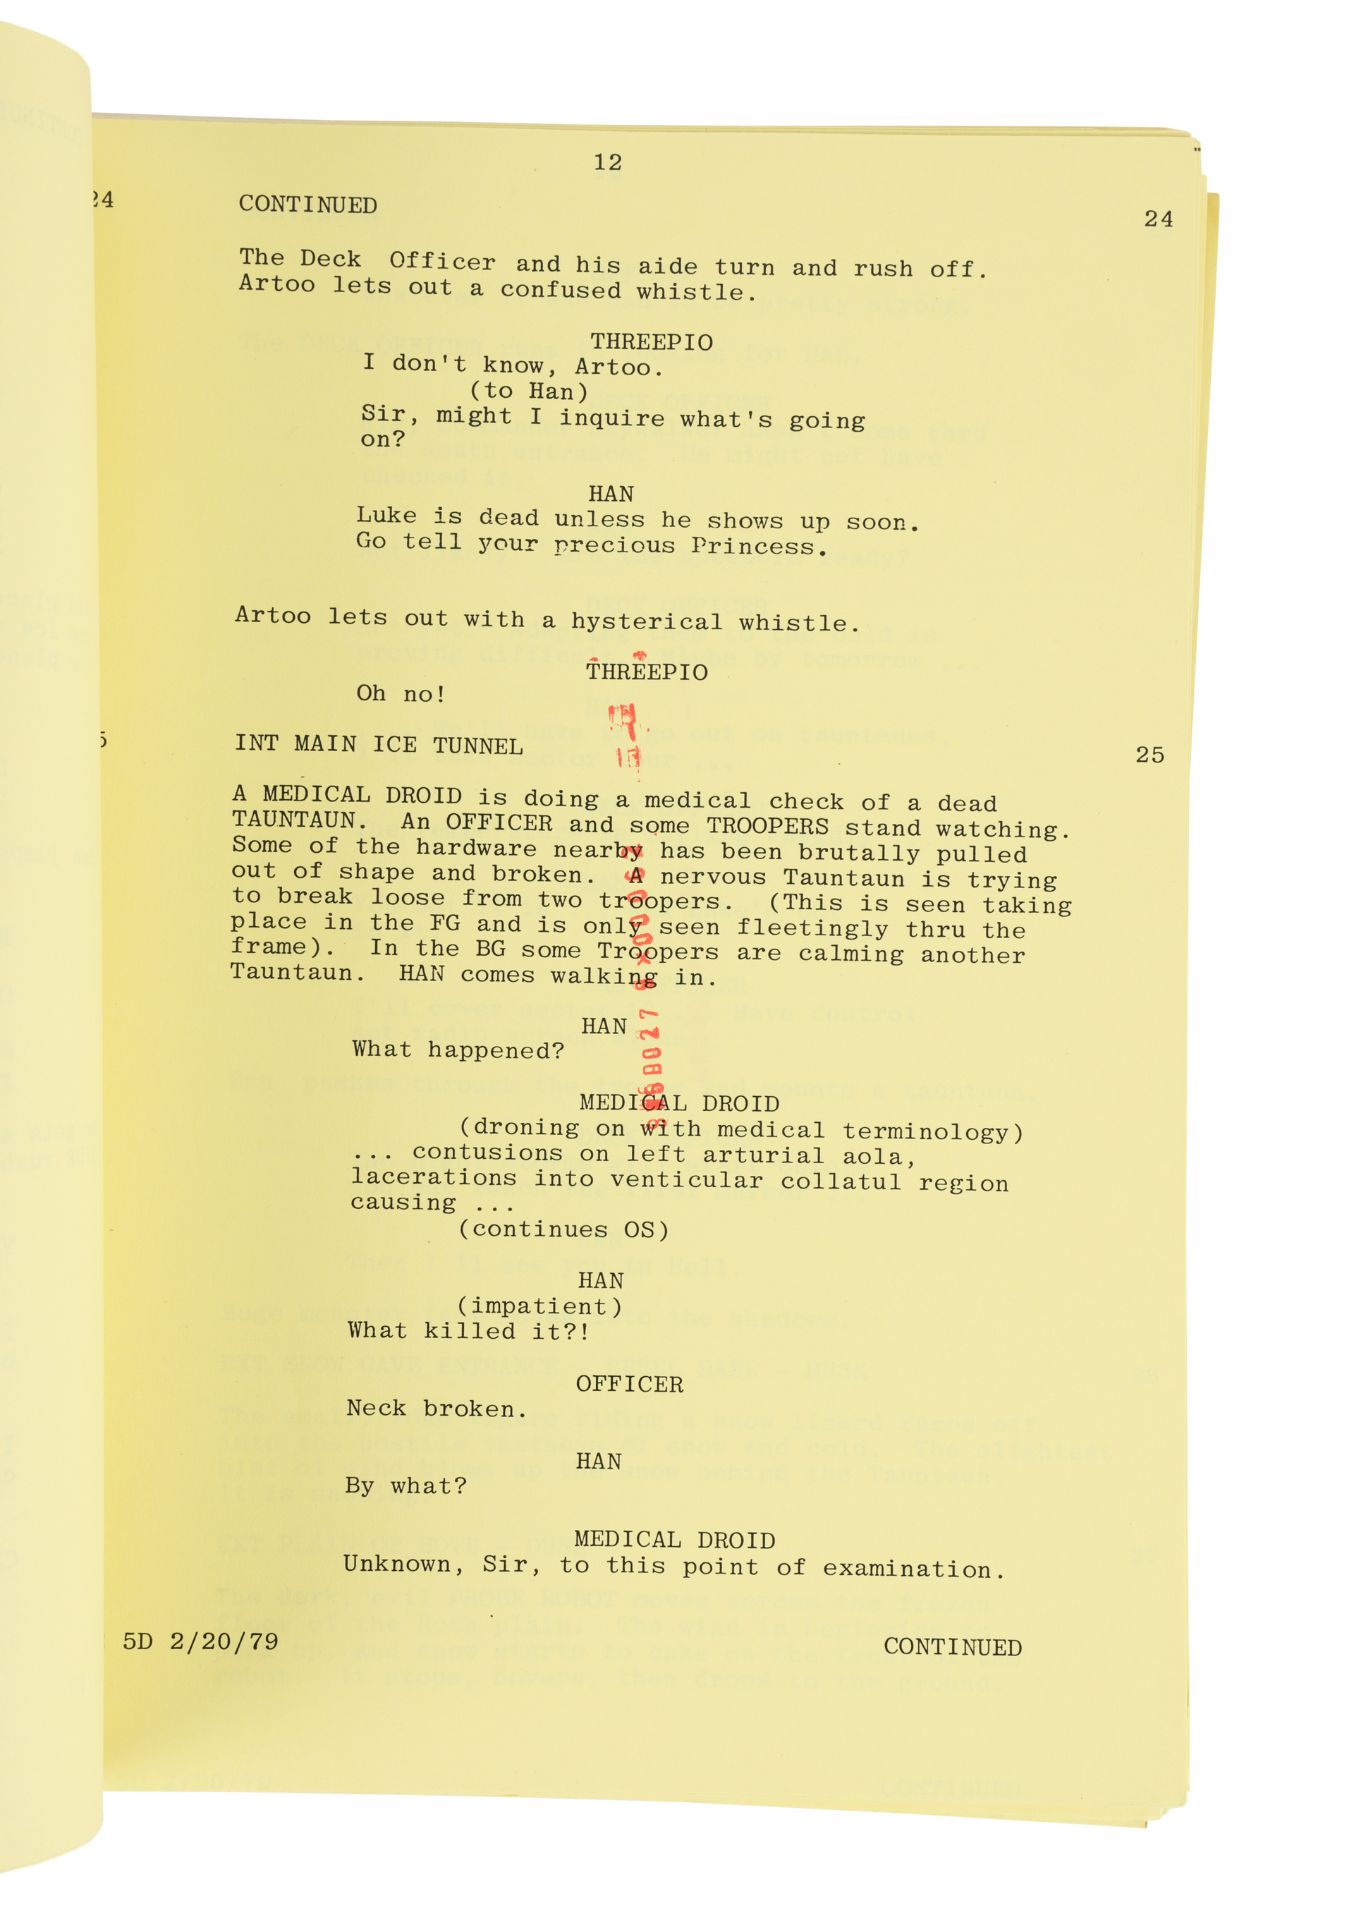 STAR WARS: THE EMPIRE STRIKES BACK (1980) - Anthony Daniels Collection: Hand-annotated Partial Scrip - Image 4 of 12